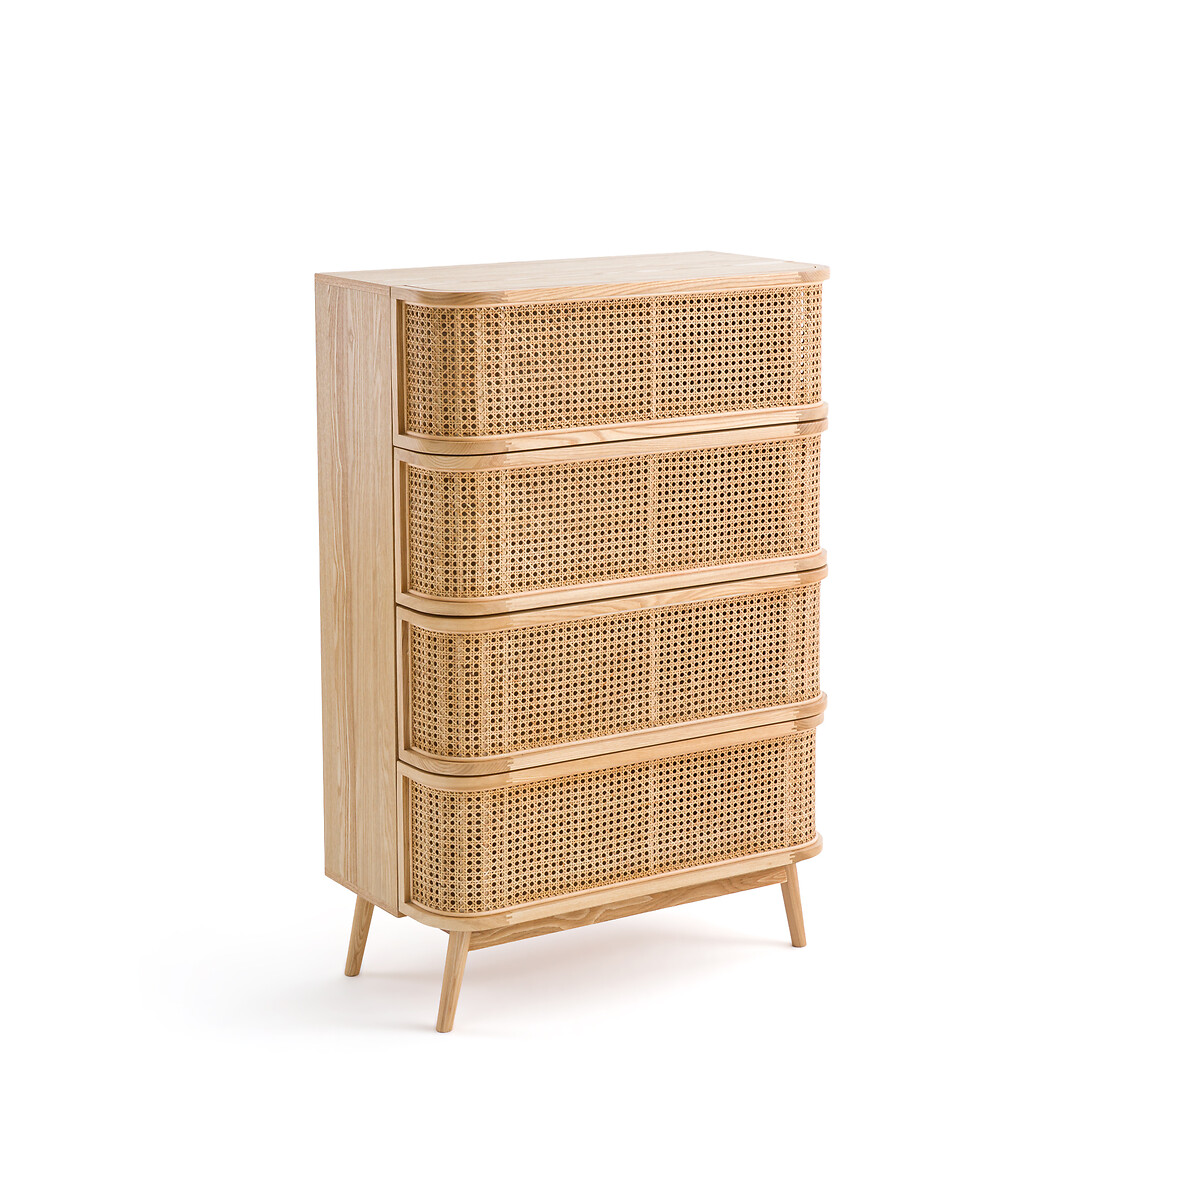 Laora Canework Chest of 4 Drawers